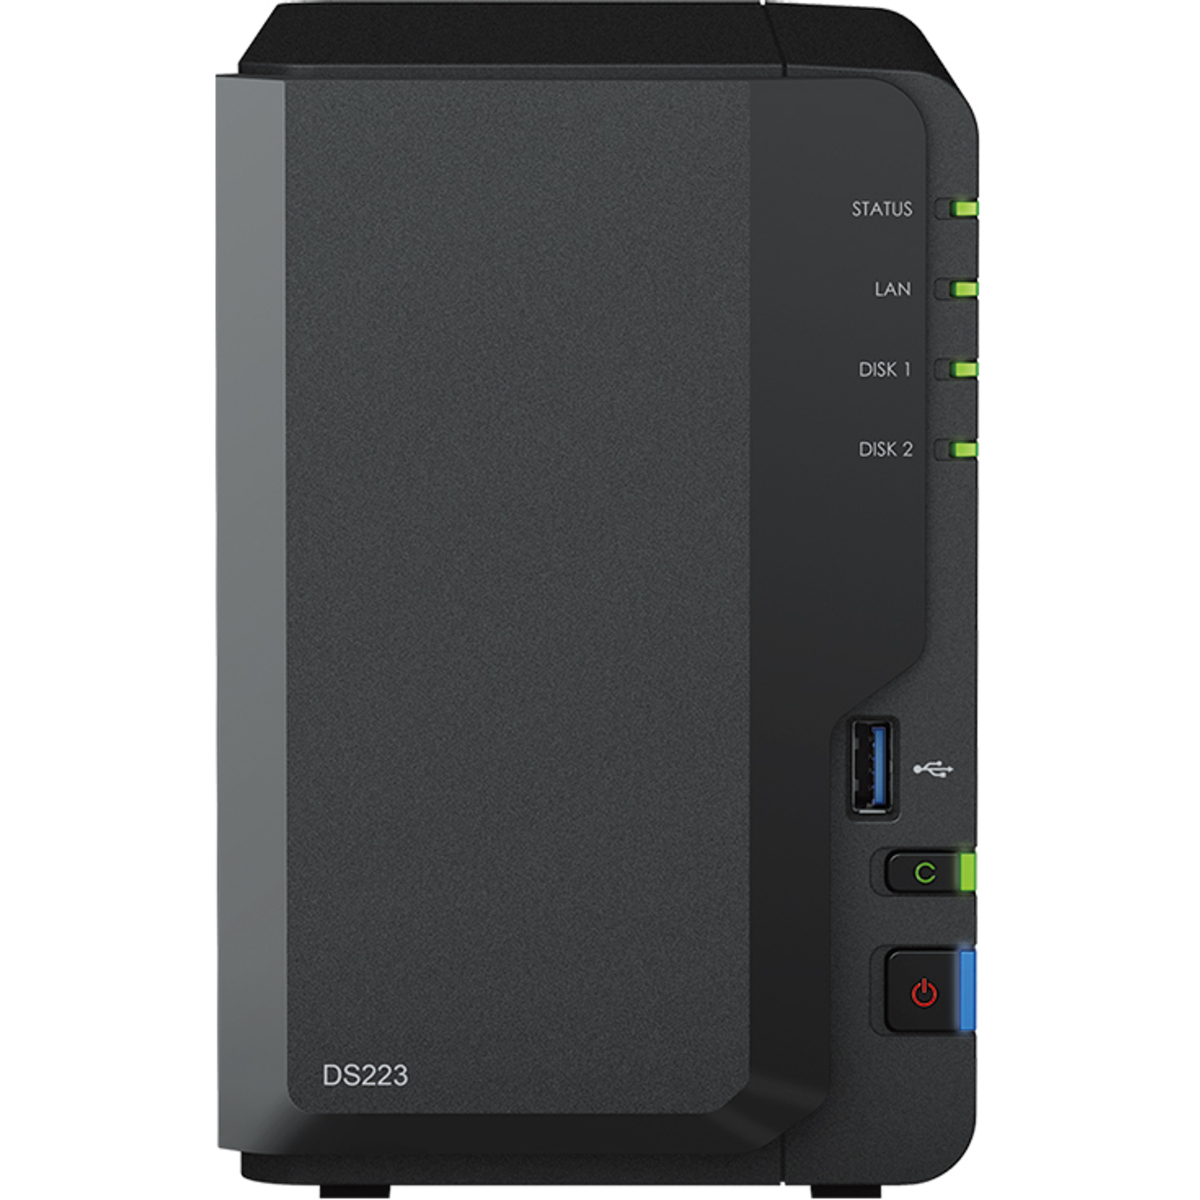 Synology DiskStation DS223 8tb 2-Bay Desktop Personal / Basic Home / Small Office NAS - Network Attached Storage Device 1x8tb Western Digital Ultrastar DC HC320 HUS728T8TALE6L4 3.5 7200rpm SATA 6Gb/s HDD ENTERPRISE Class Drives Installed - Burn-In Tested DiskStation DS223